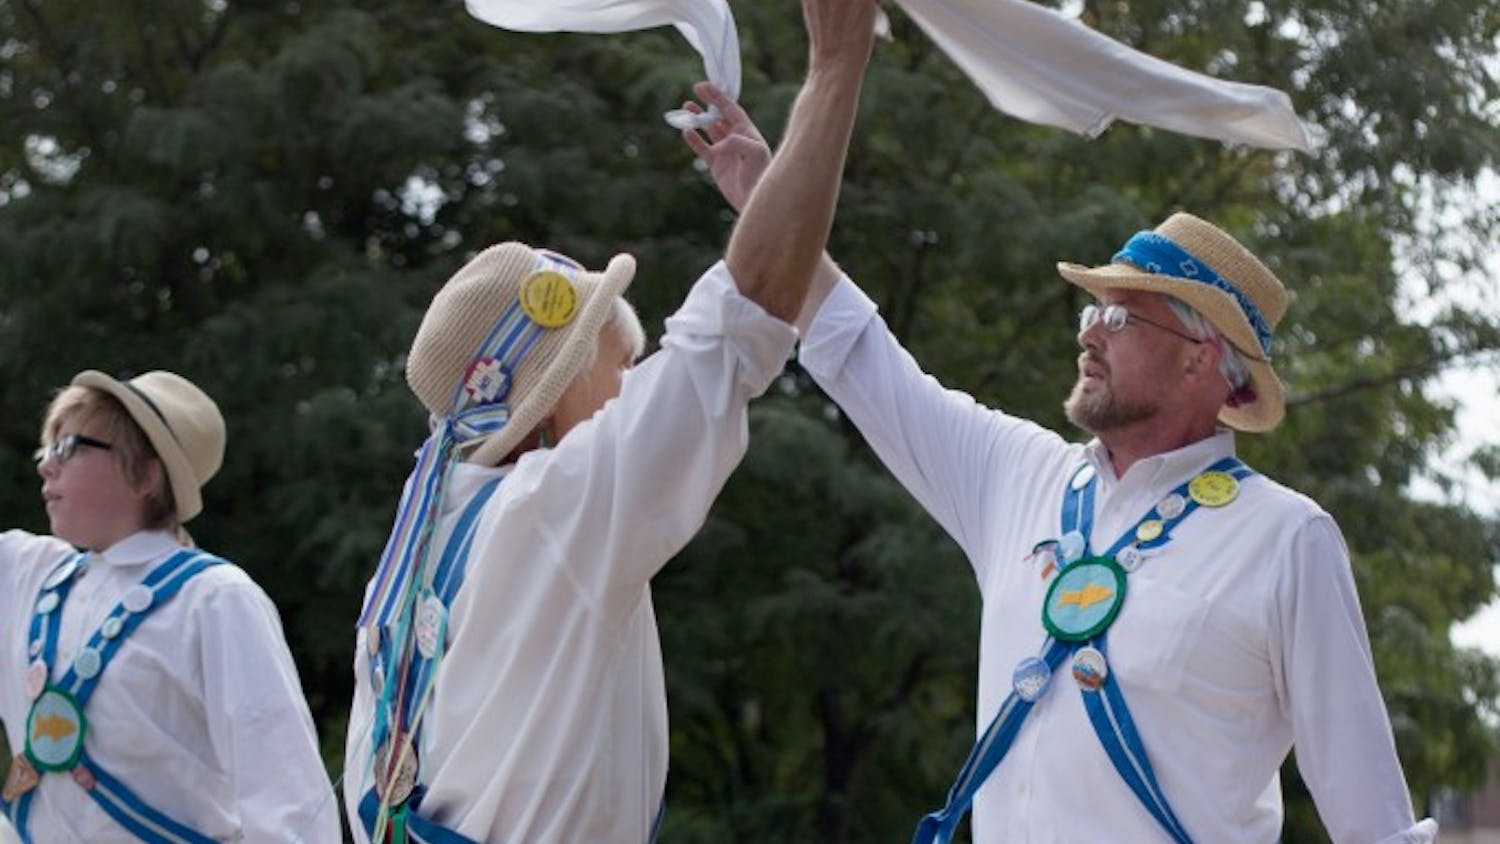 Martha Marmouze and Jeremy Nottinham perform Saturday at the Farmers Market in downtown Bloomington with their traditional English dance group, the Bloomington Quarry Morris. The group was founded more than 30 years ago and includes members from a variety of ages. 